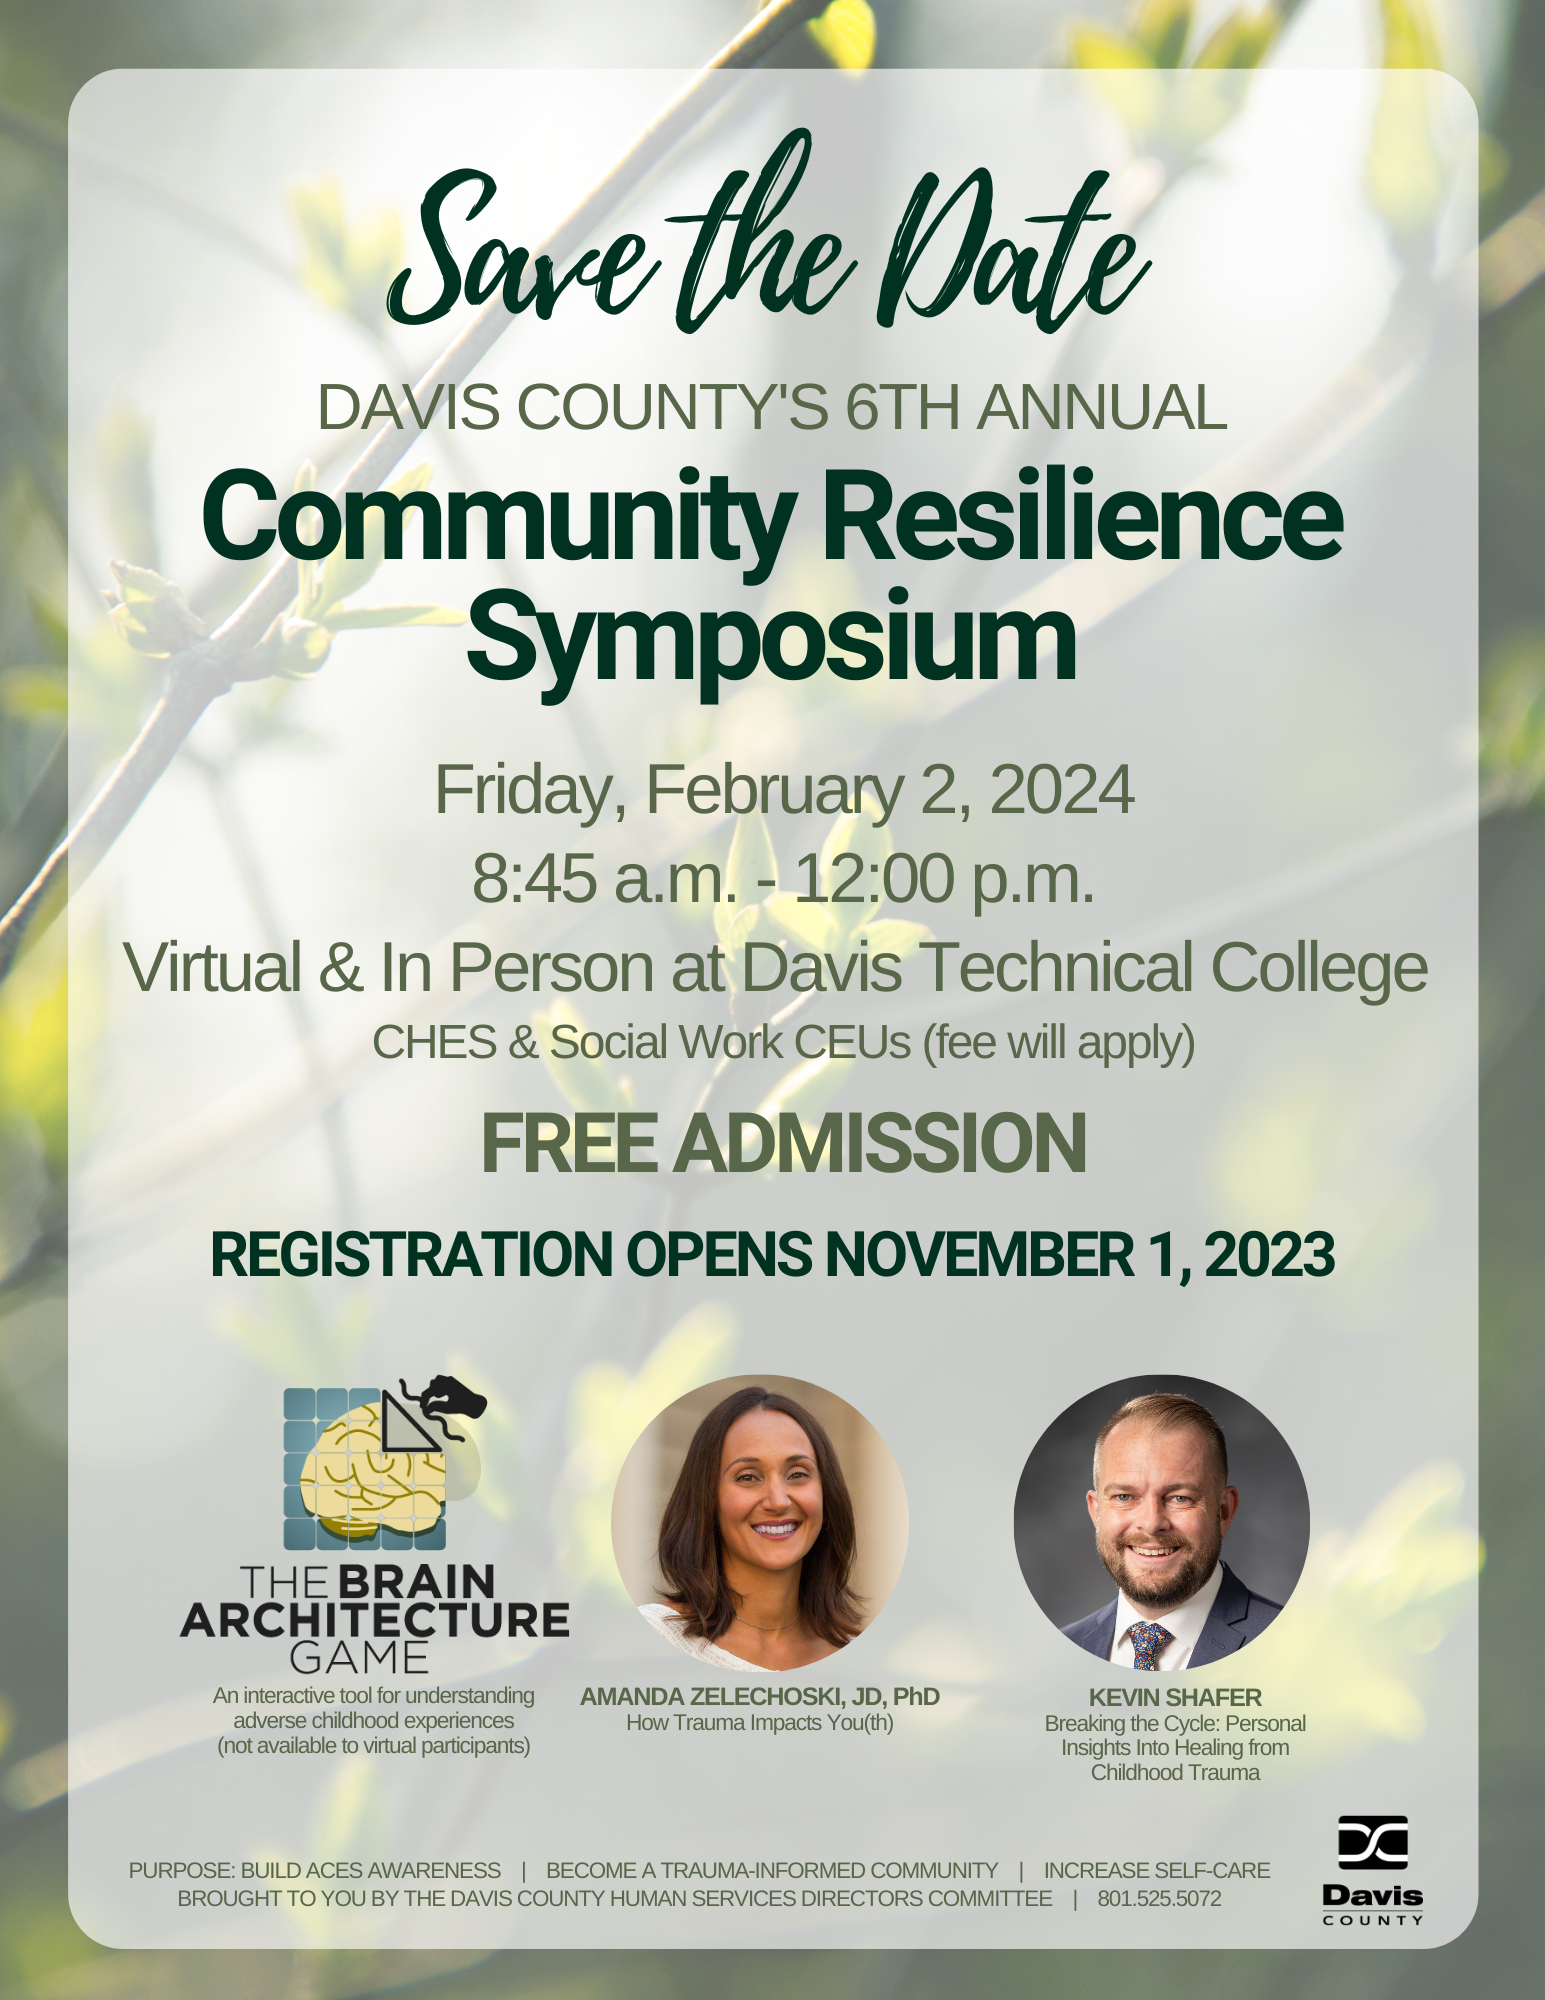 Save the Date, Davis County 6th Annual Resilience Symposium (February 2, 2024) at Davis Technical College in Kaysville, 8:45 a.m. to 12 p.m. Registration opens November 1st